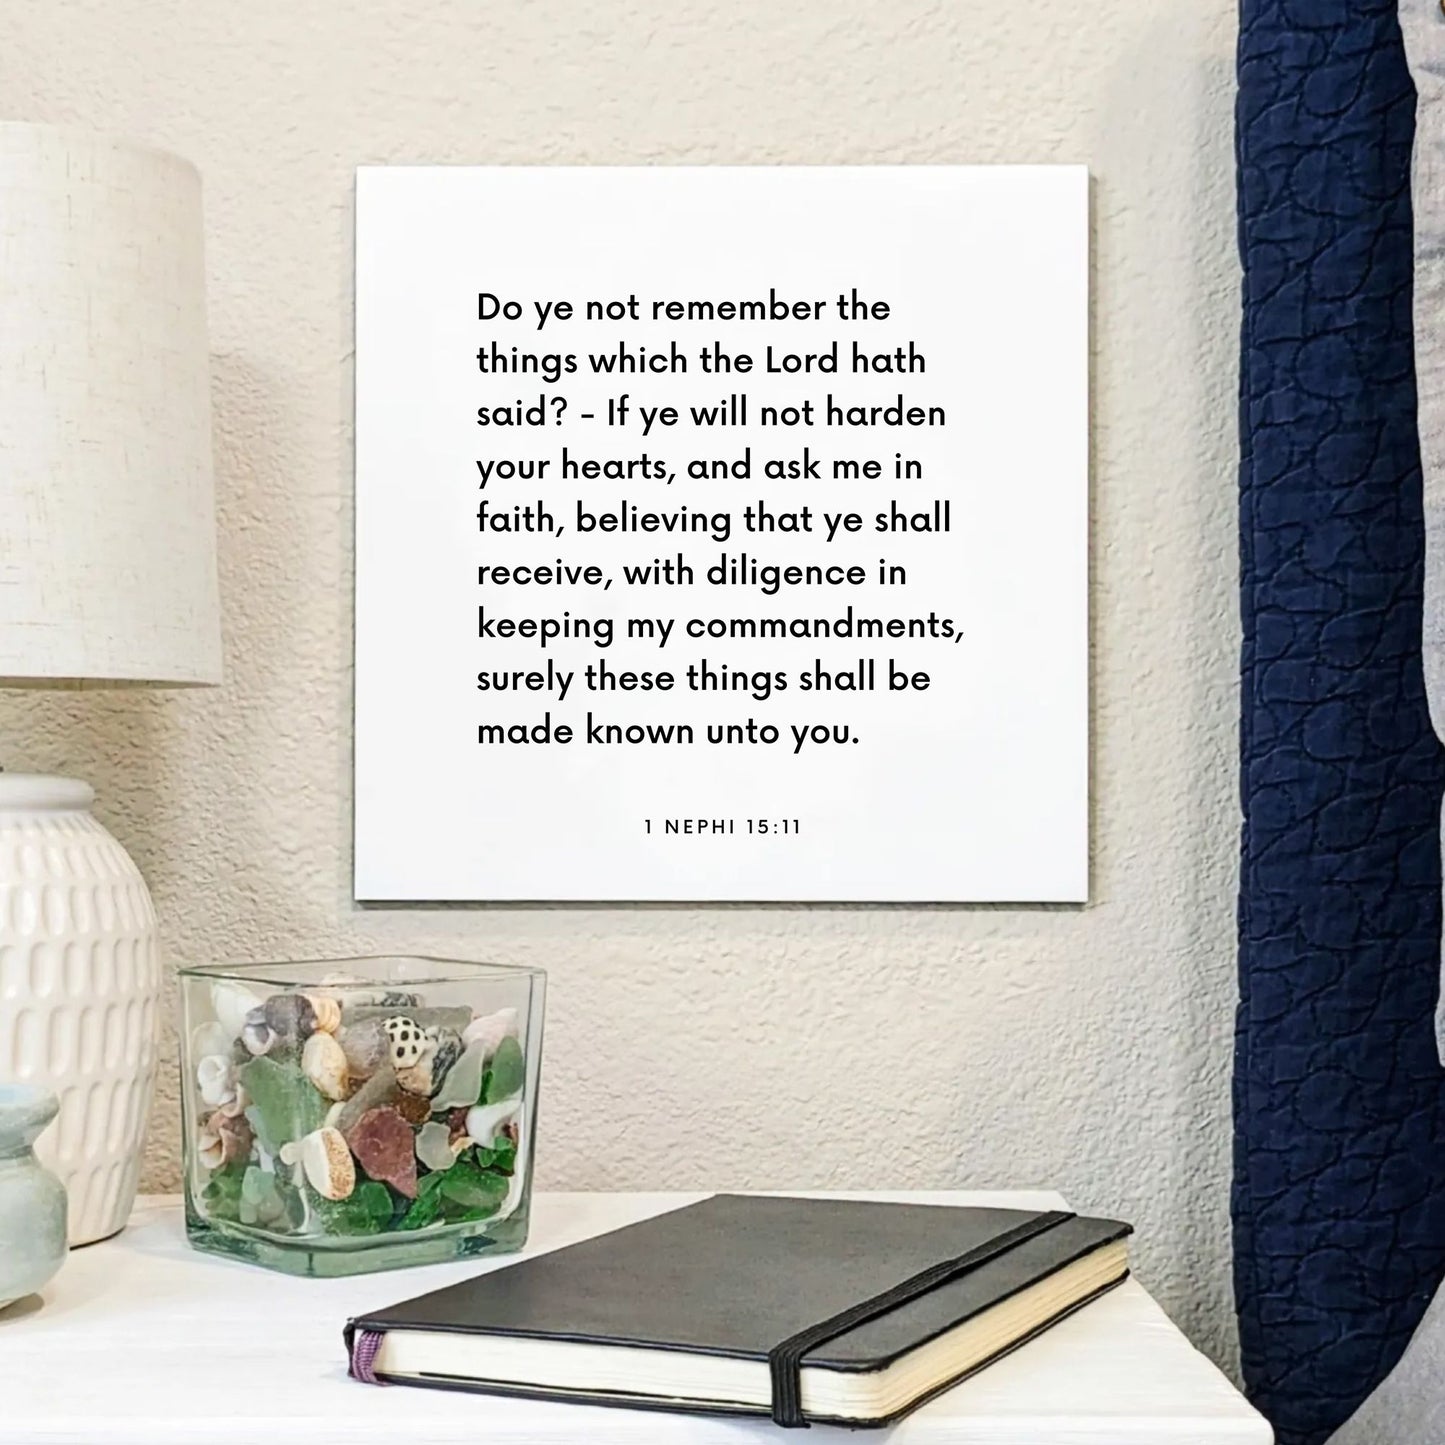 Bedside mouting of the scripture tile for 1 Nephi 15:11 - "Surely these things shall be made known unto you"